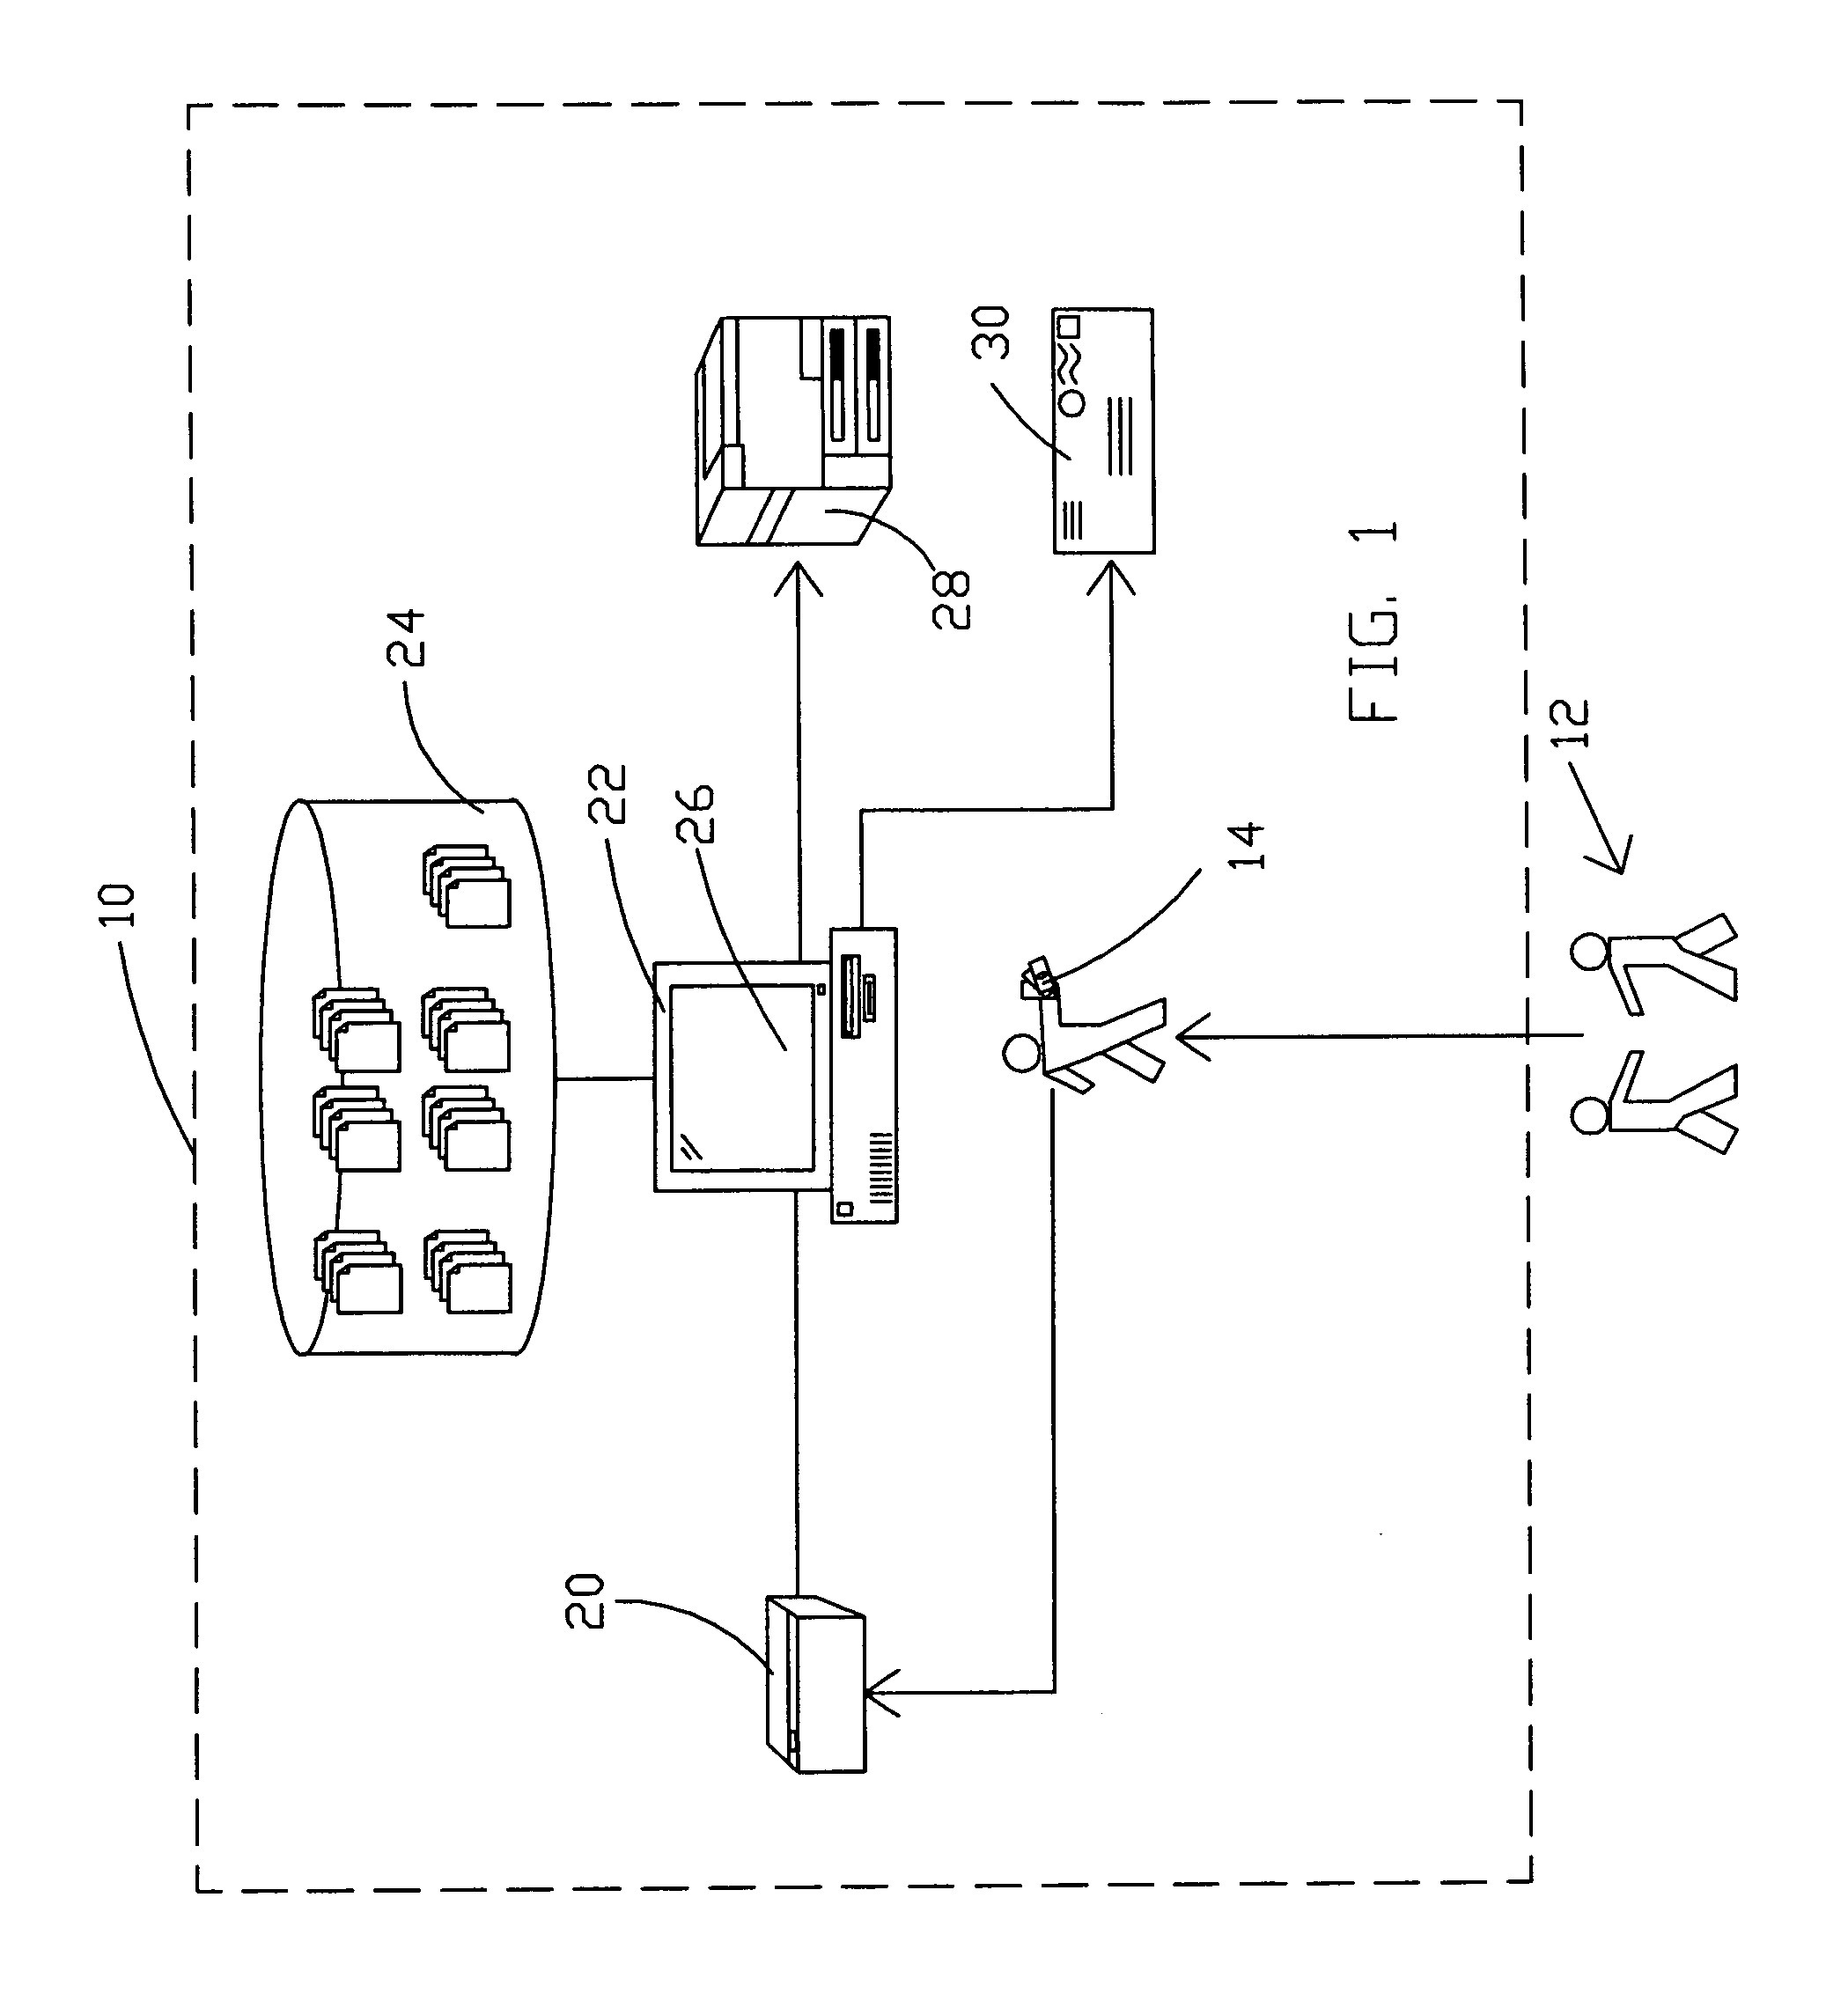 Credit card chargeback inquiry handling system and method